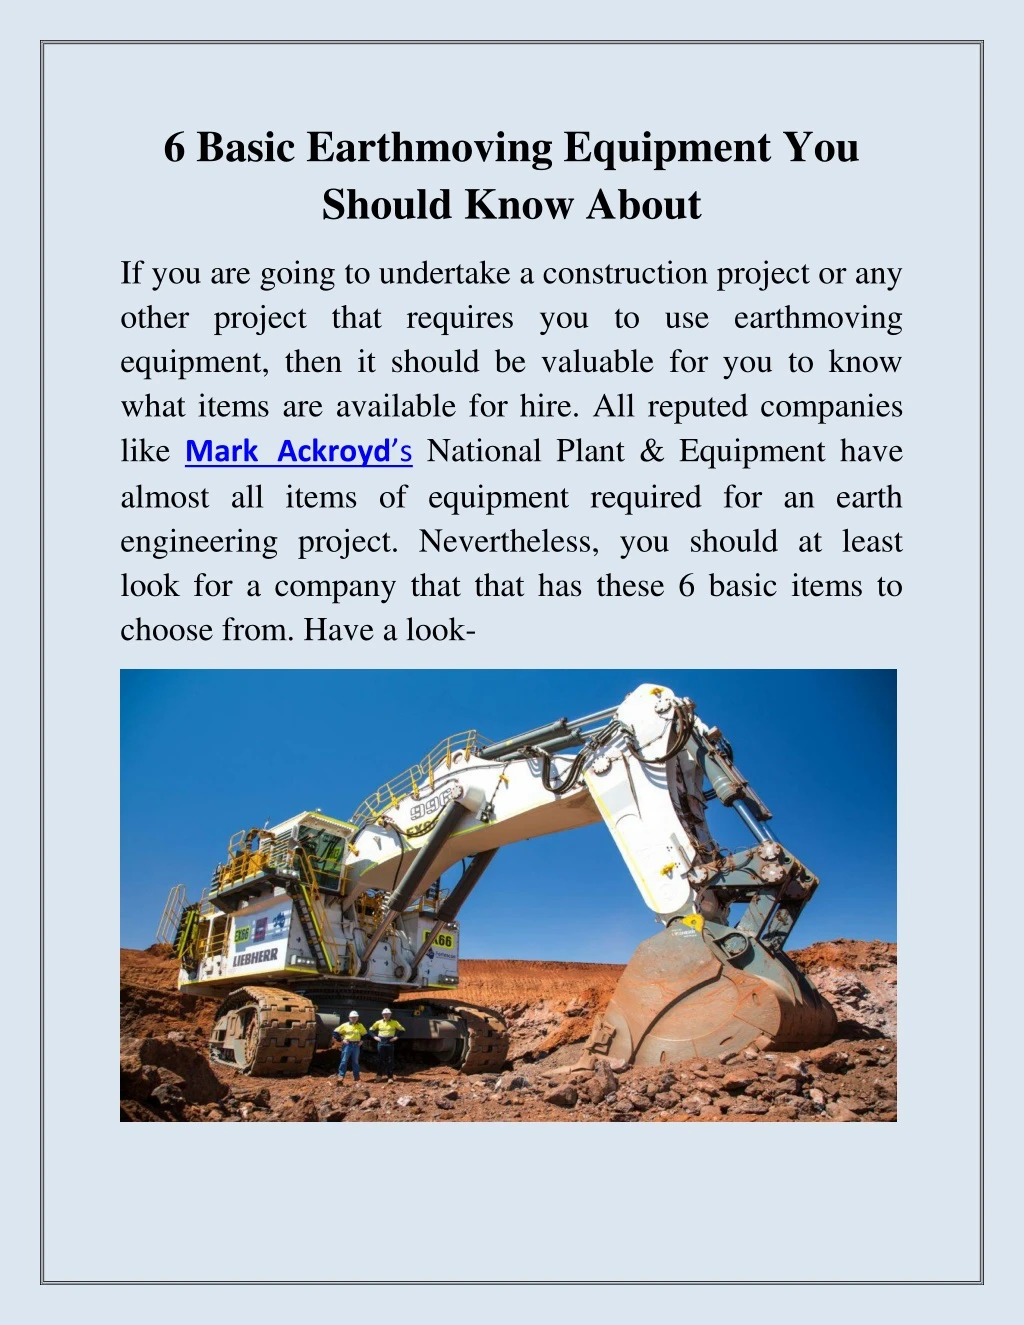 6 basic earthmoving equipment you should know